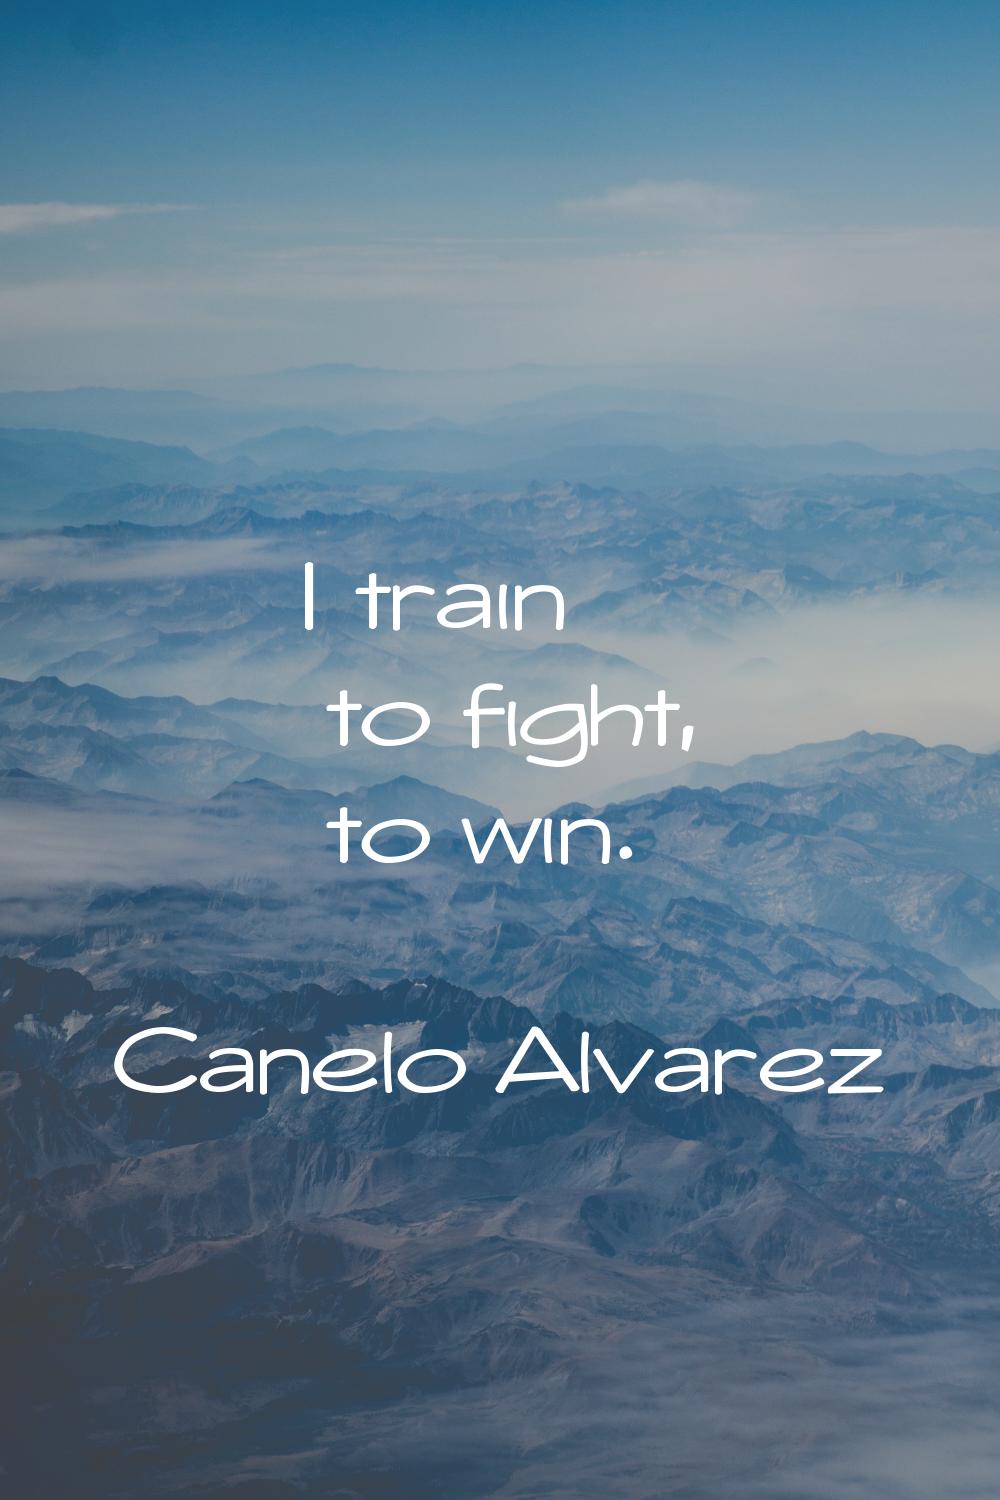 I train to fight, to win.